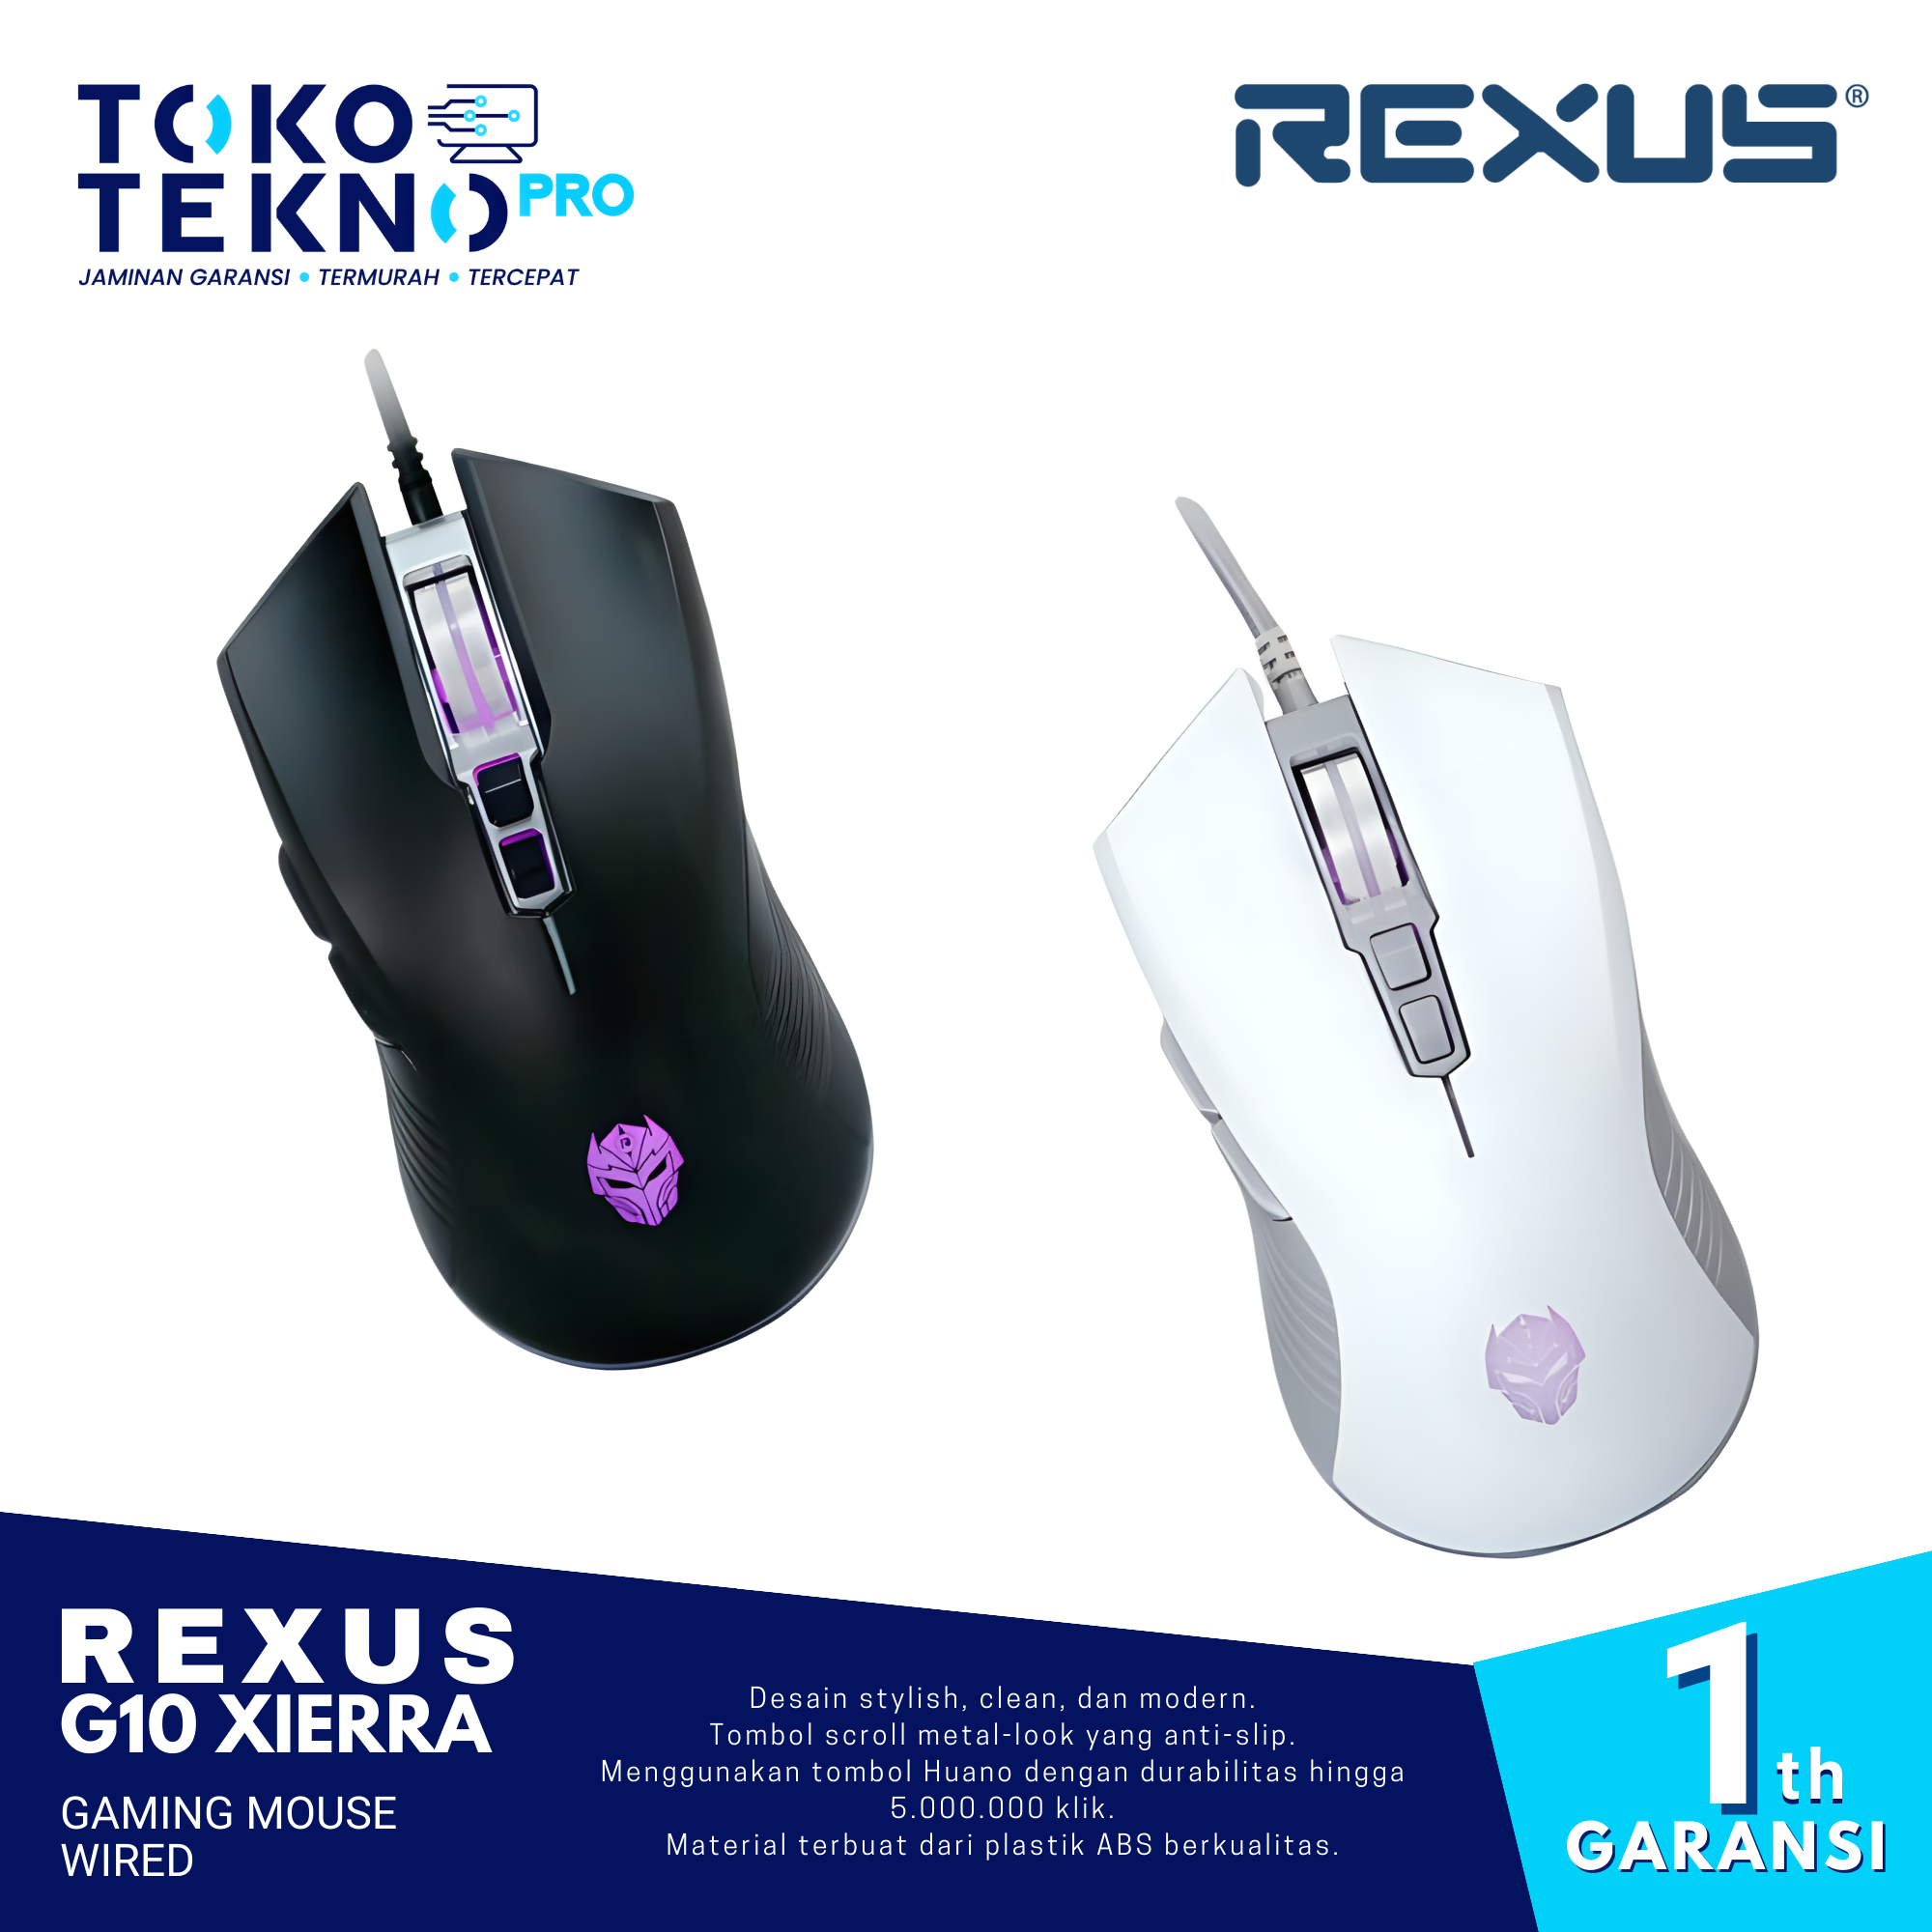 Rexus G10 Xierra Gaming Mouse Wired USB